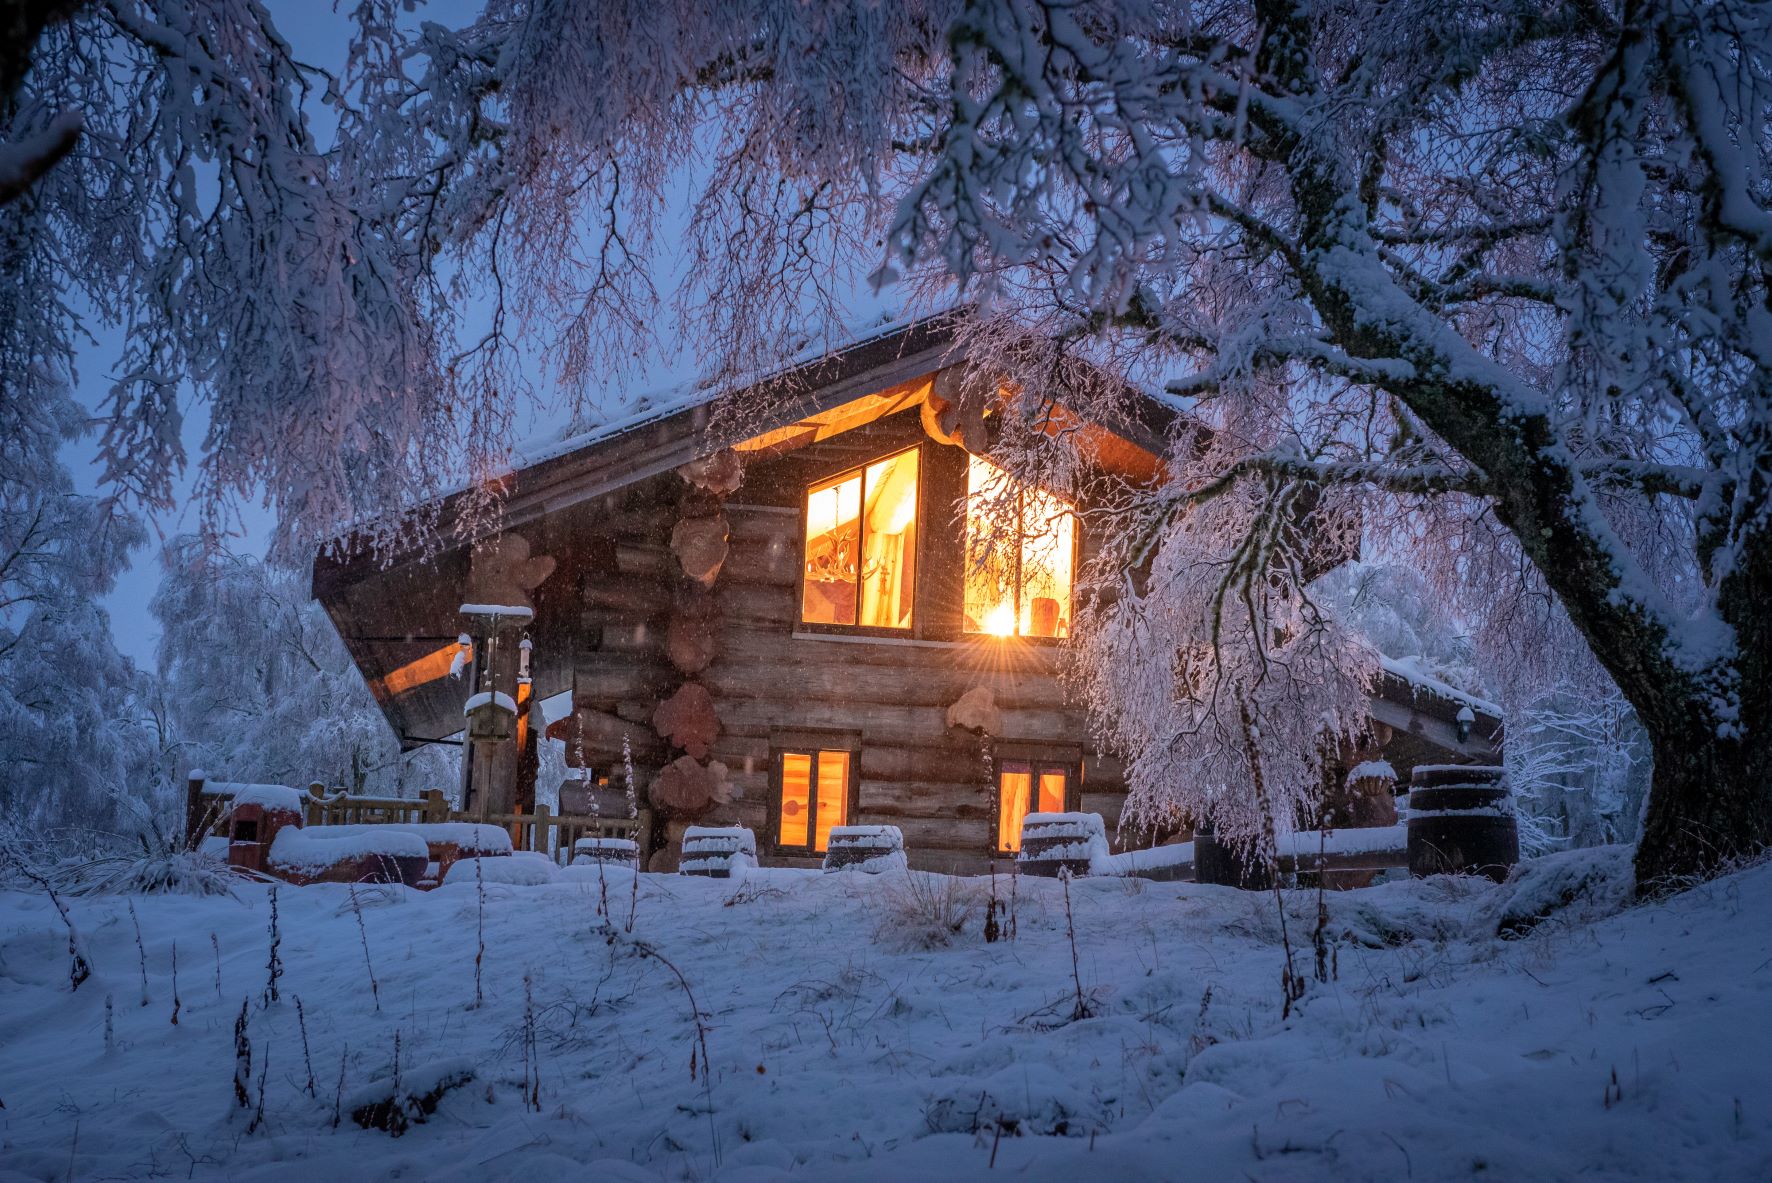 Ardea log cabin surrounded by snow